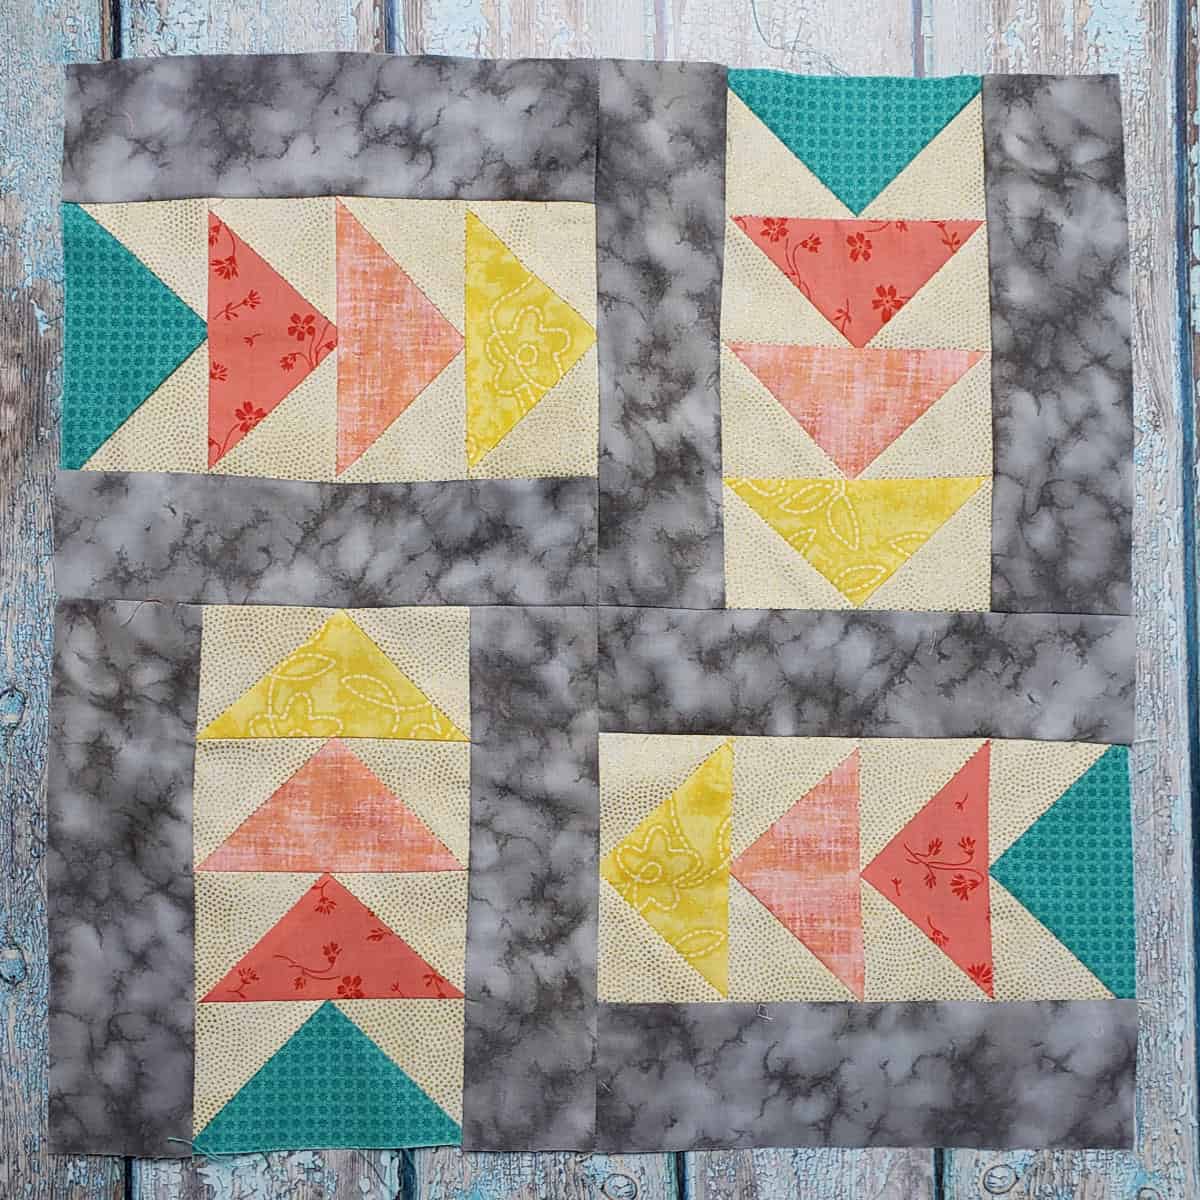 Sewing the flying geese blocks together